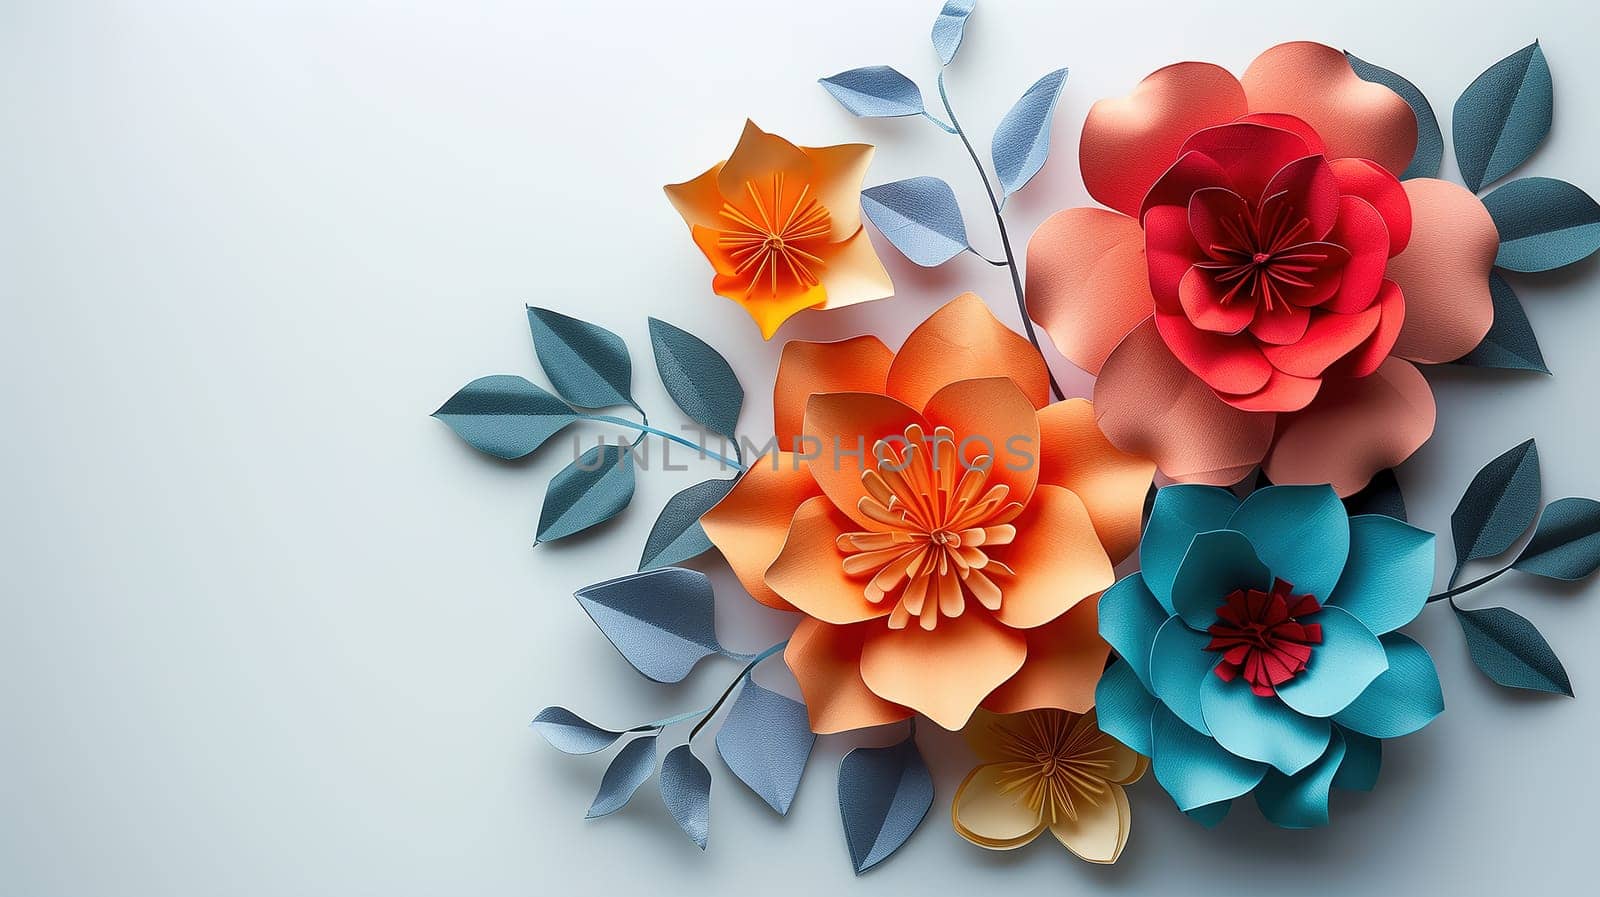 A collection of paper flowers are neatly arranged on a plain white surface. Each flower is uniquely handcrafted with colorful paper petals. The flowers are various sizes and shapes, creating a visually appealing display.